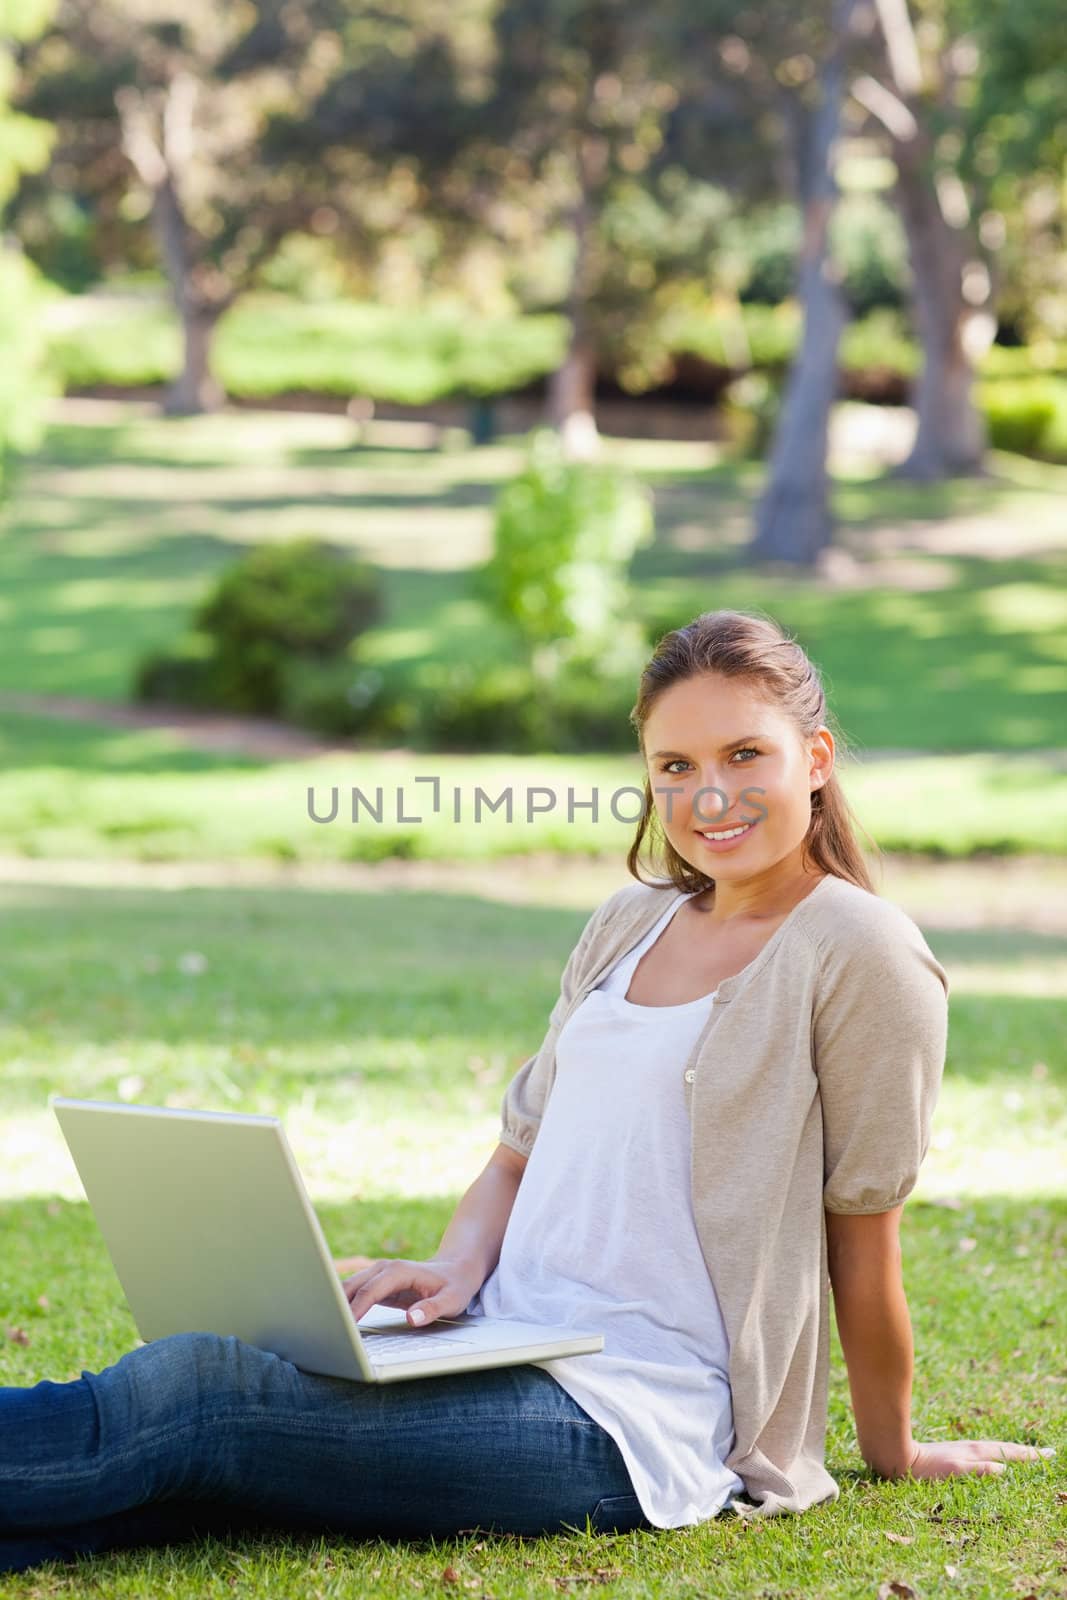 Smiling woman with her notebook in the park by Wavebreakmedia